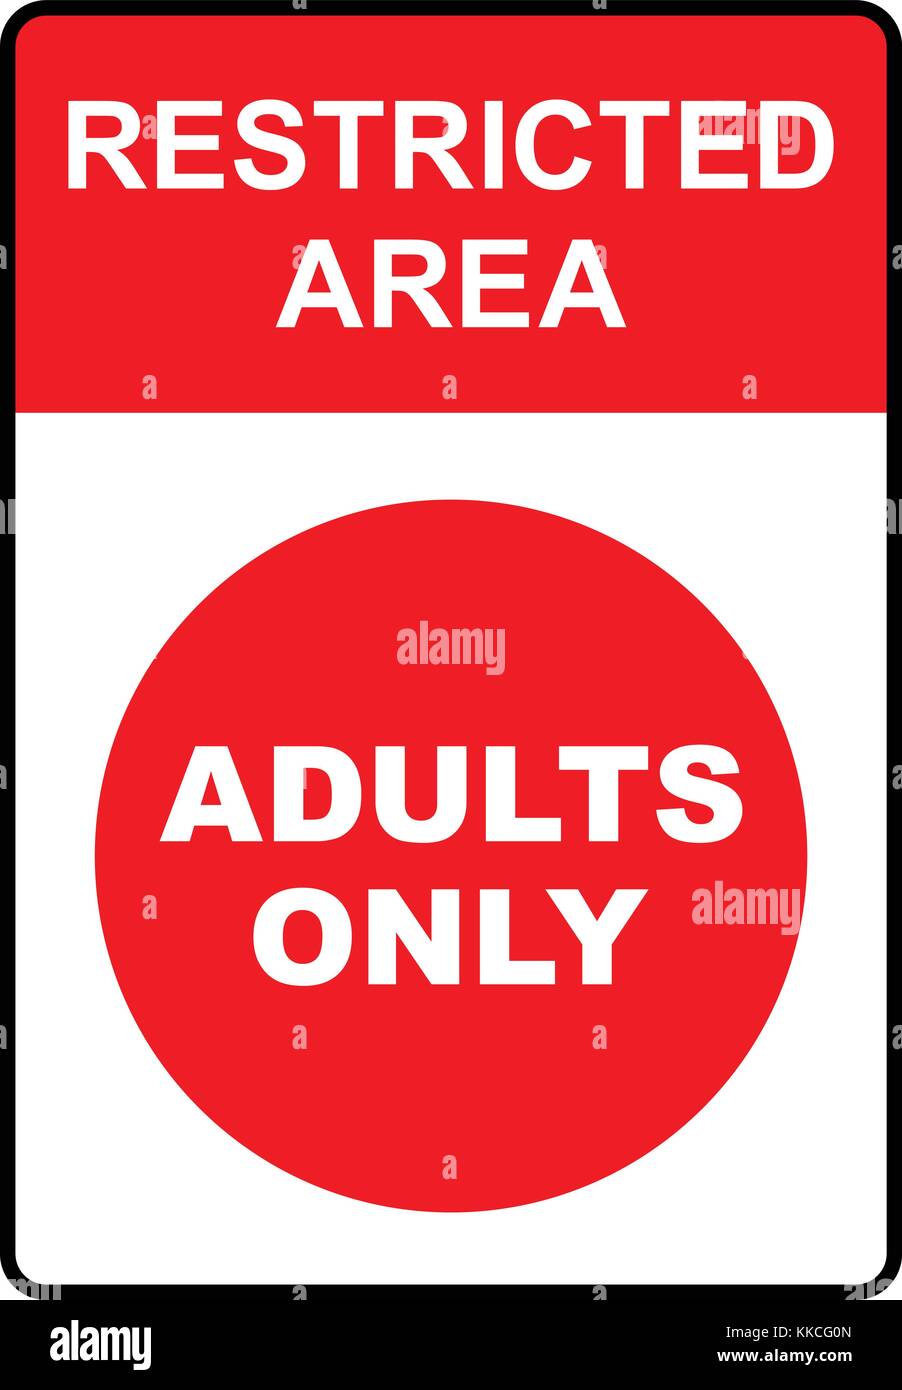 Restricted area, 18+, adults only sign, vector illustration. Stock Vector